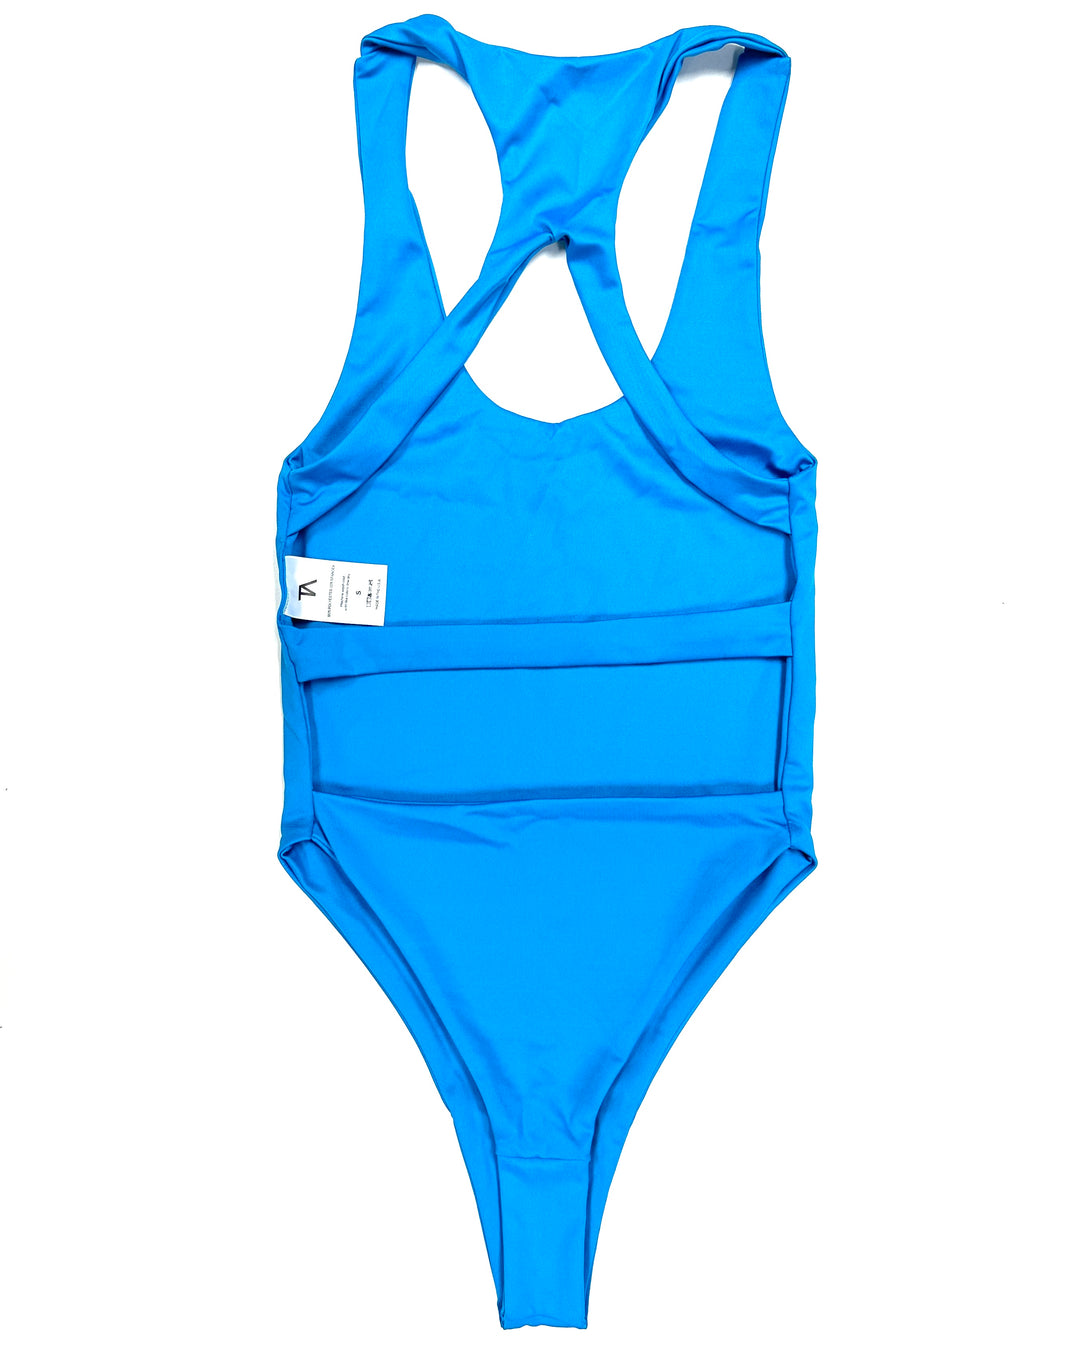 Blue One Piece Swimsuit - Size 8